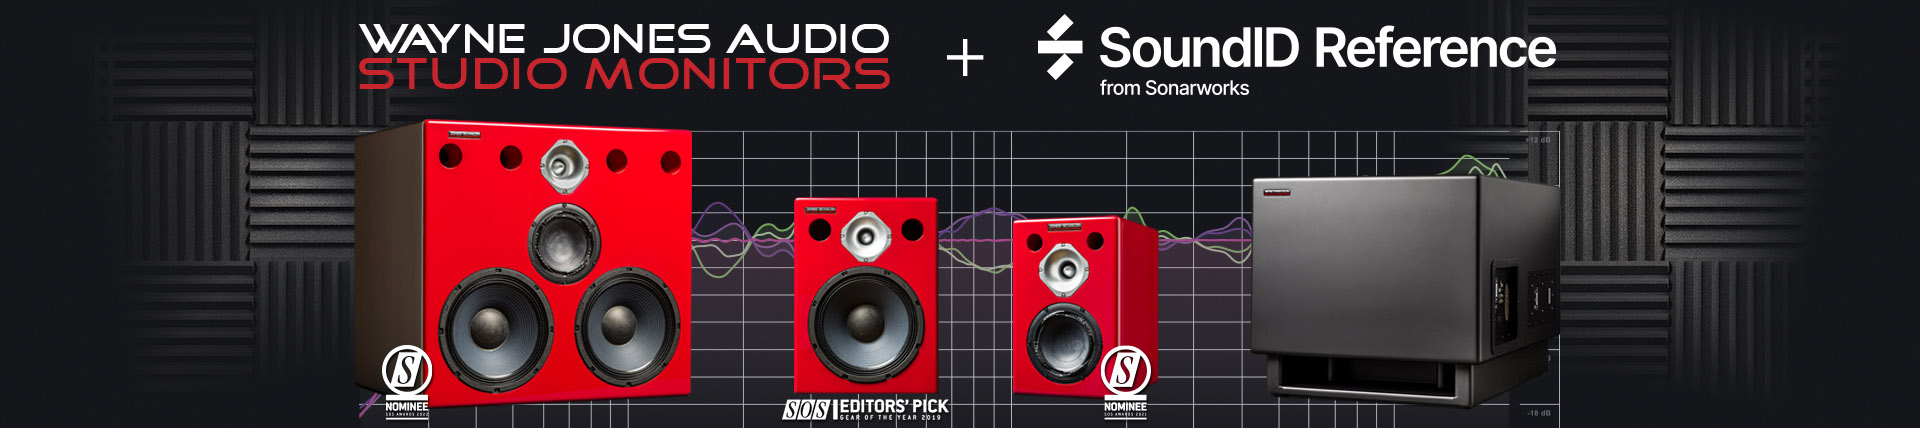 Wayne Jones Audio Studio Monitors proudly announcing a world first, with ground-breaking innovative technology achieved in partnership with Sonarworks. Upload and store room calibration profiles directly into the monitors with just one click via ethernet.